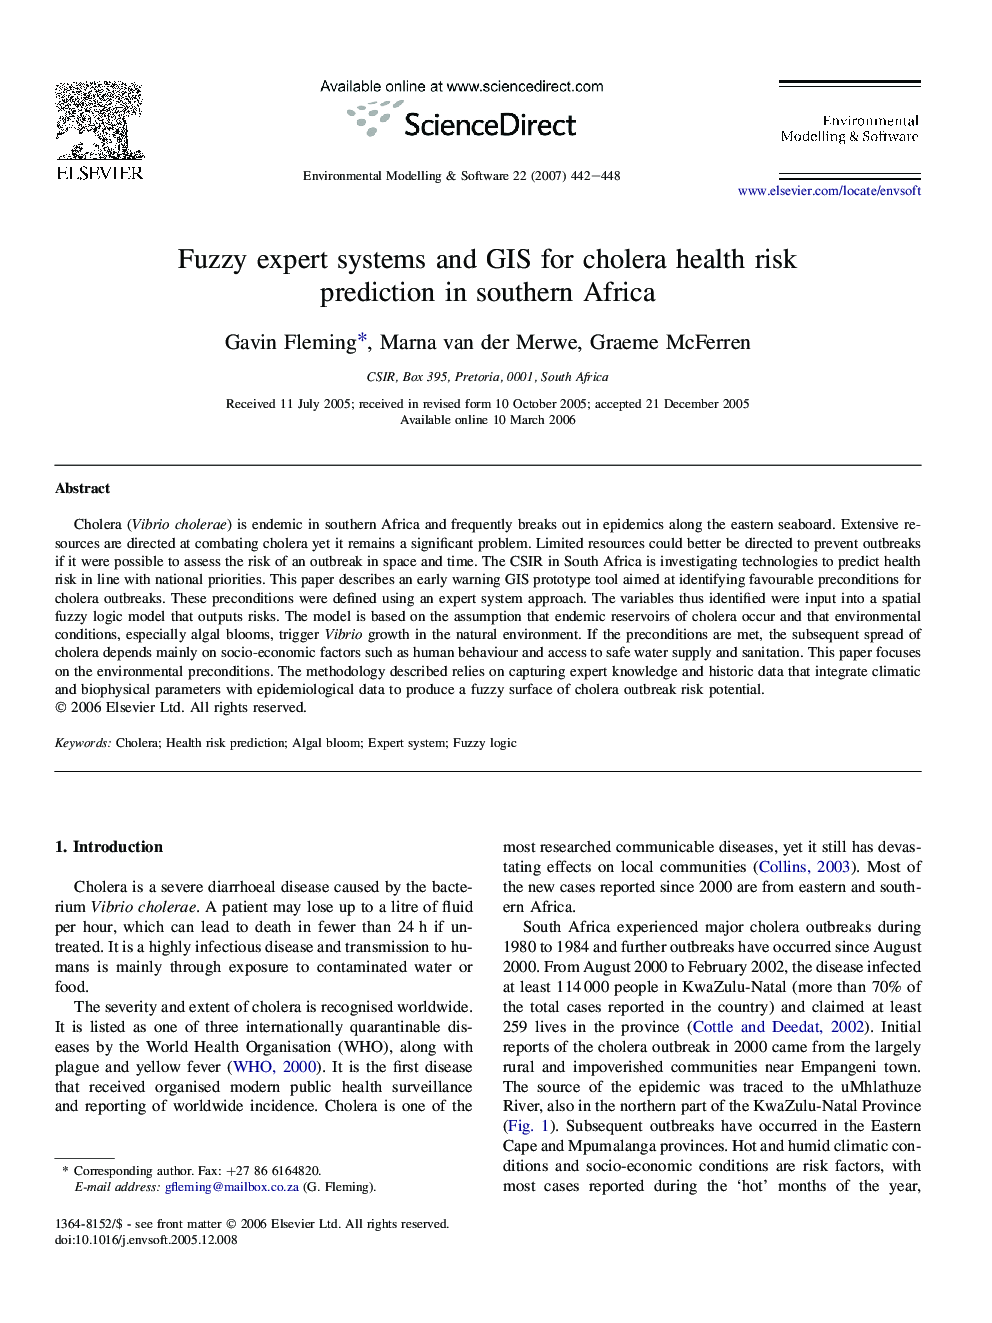 Fuzzy expert systems and GIS for cholera health risk prediction in southern Africa